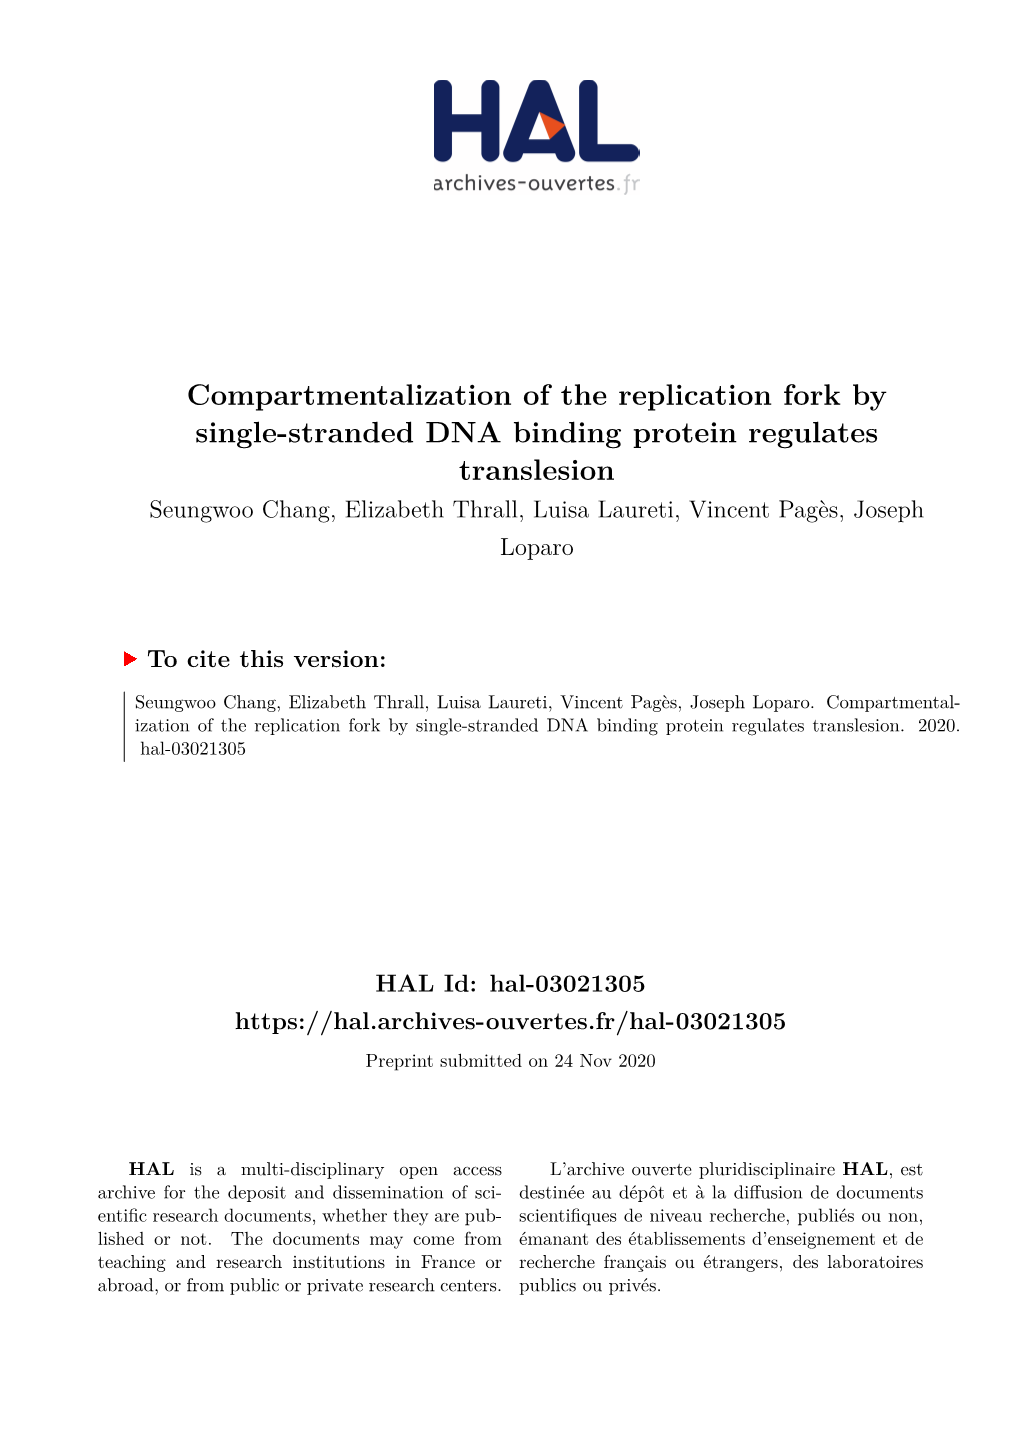 Compartmentalization of the Replication Fork by Single-Stranded